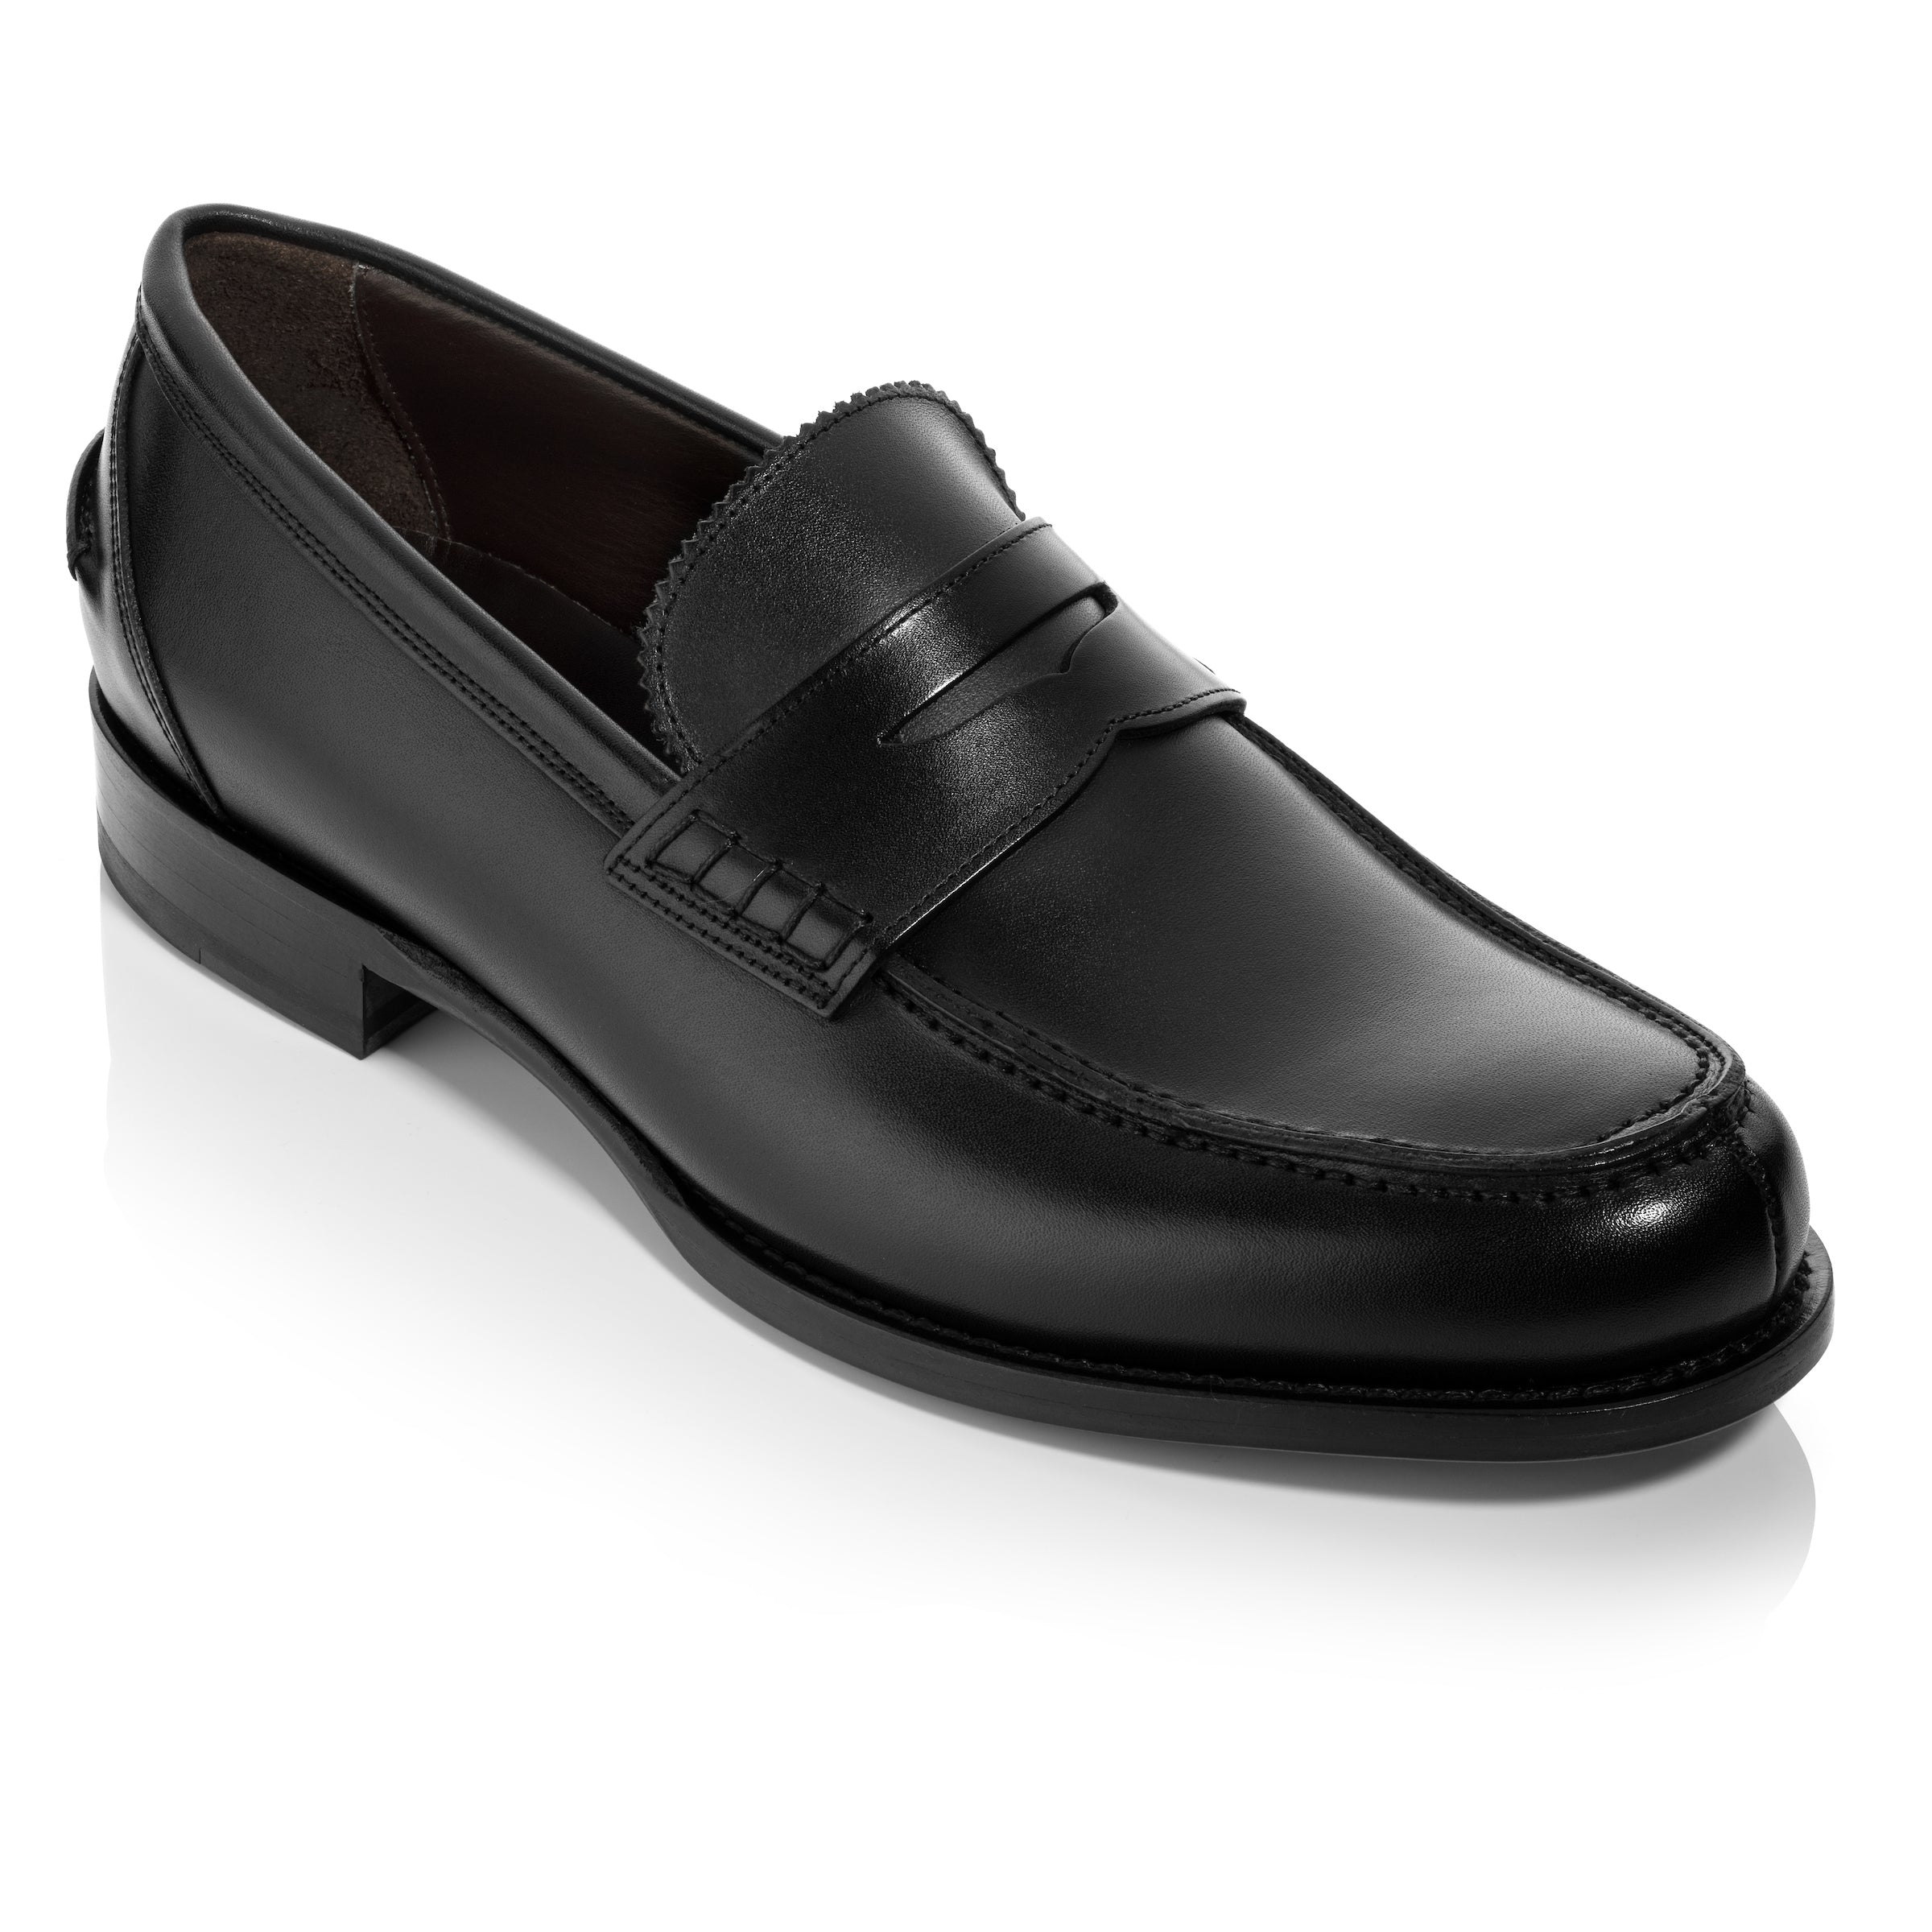 Levanzo Black Calf Penny Loafer